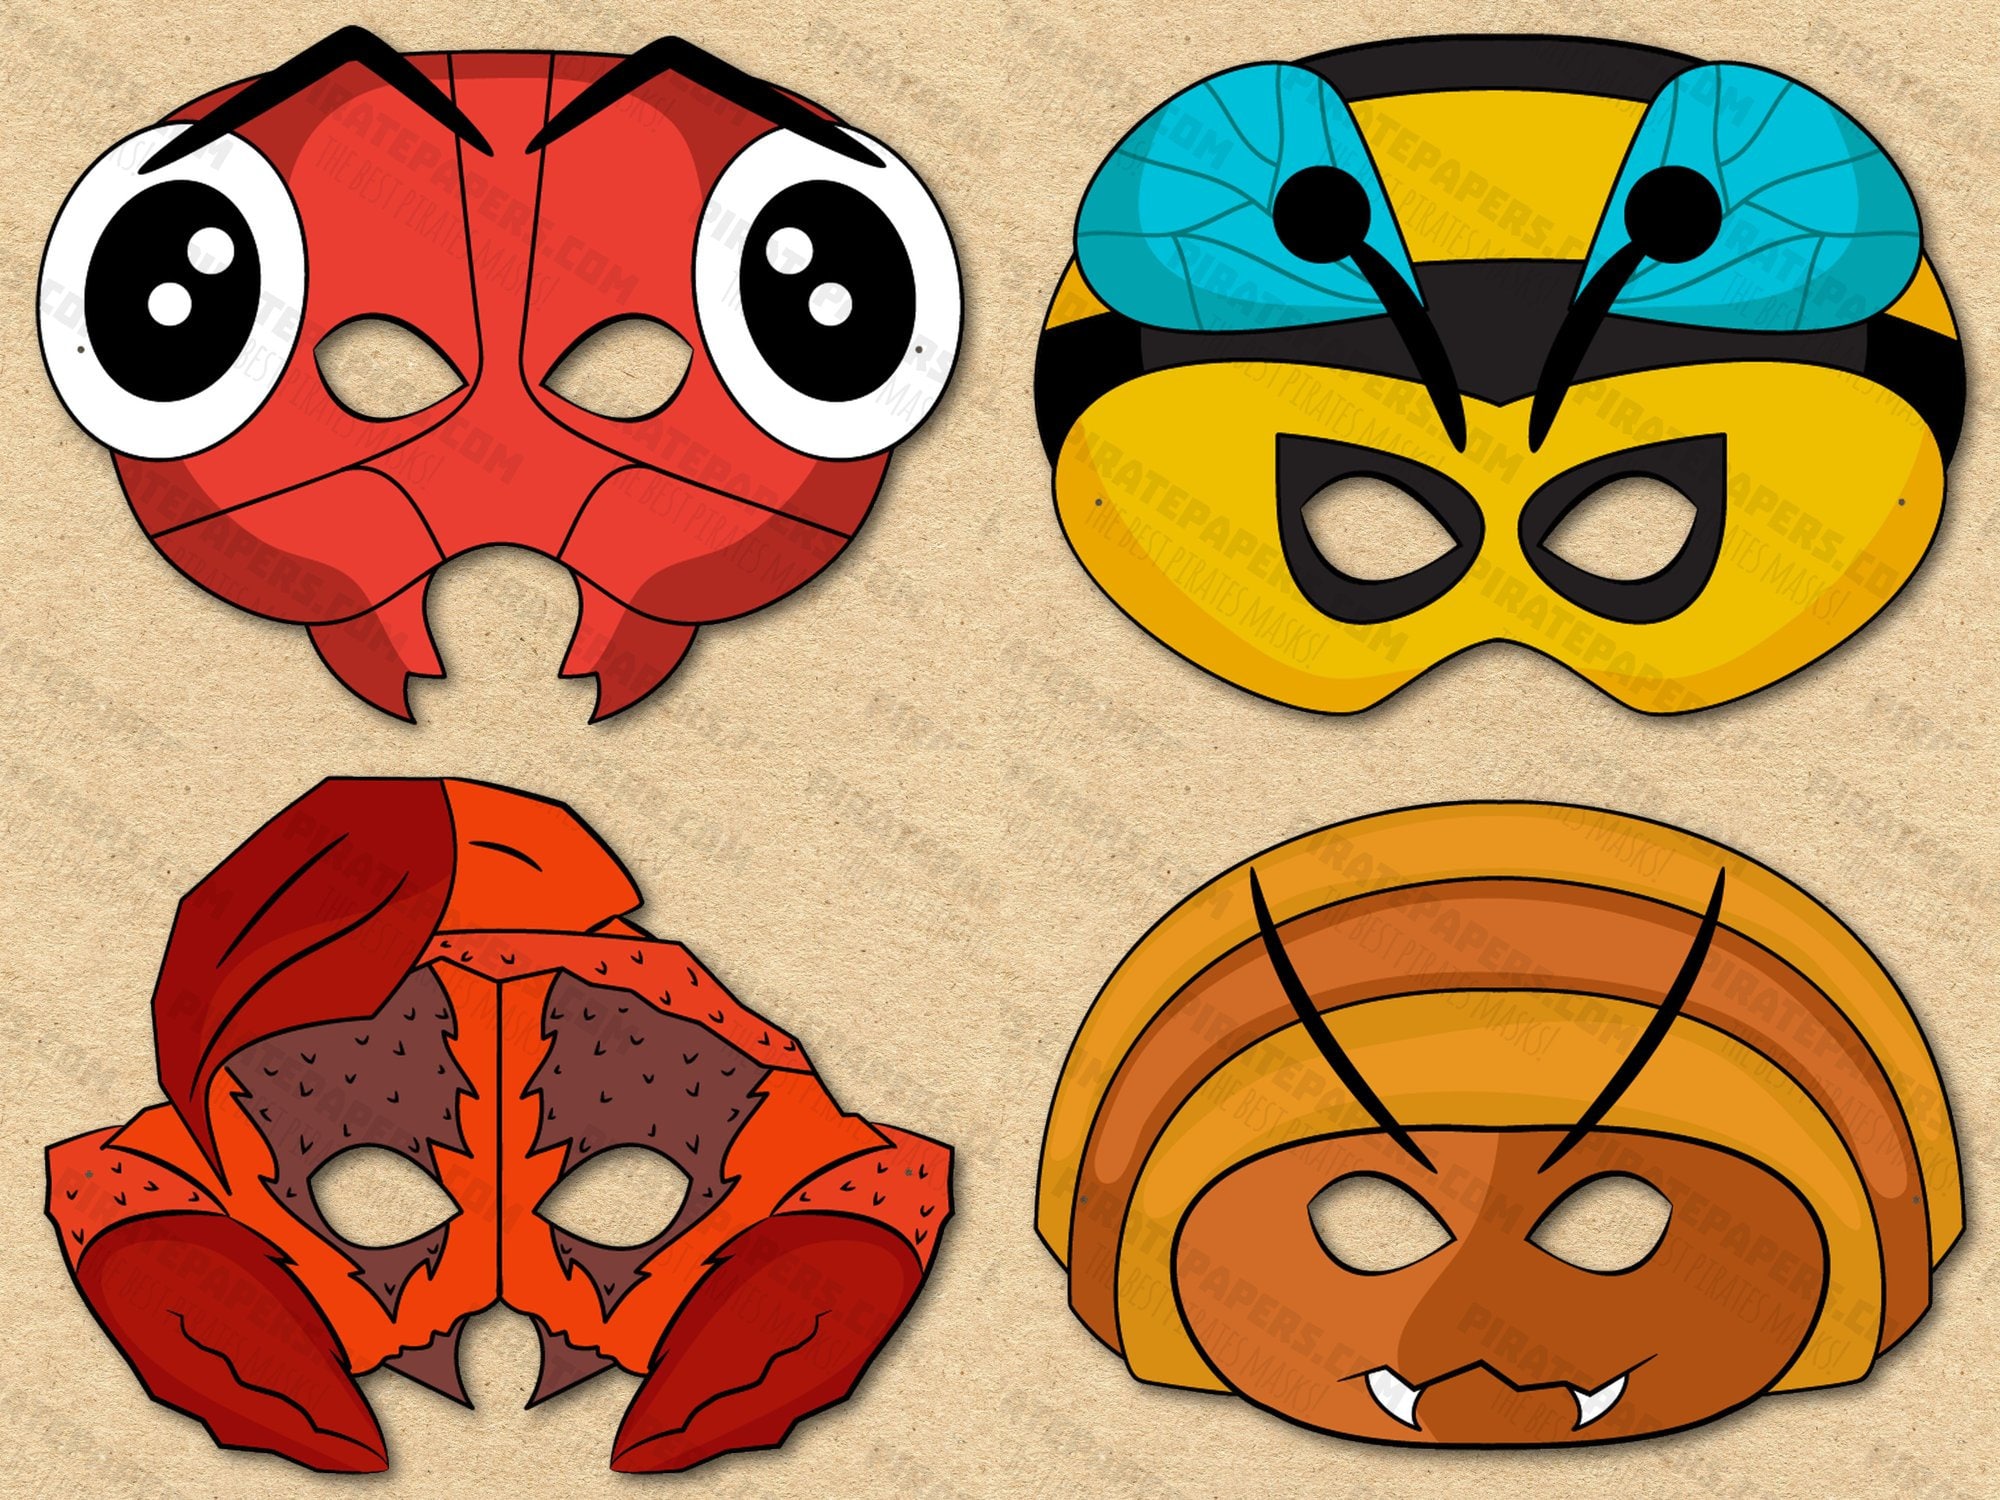 Insect Pre-cut 3D Paper Mask 